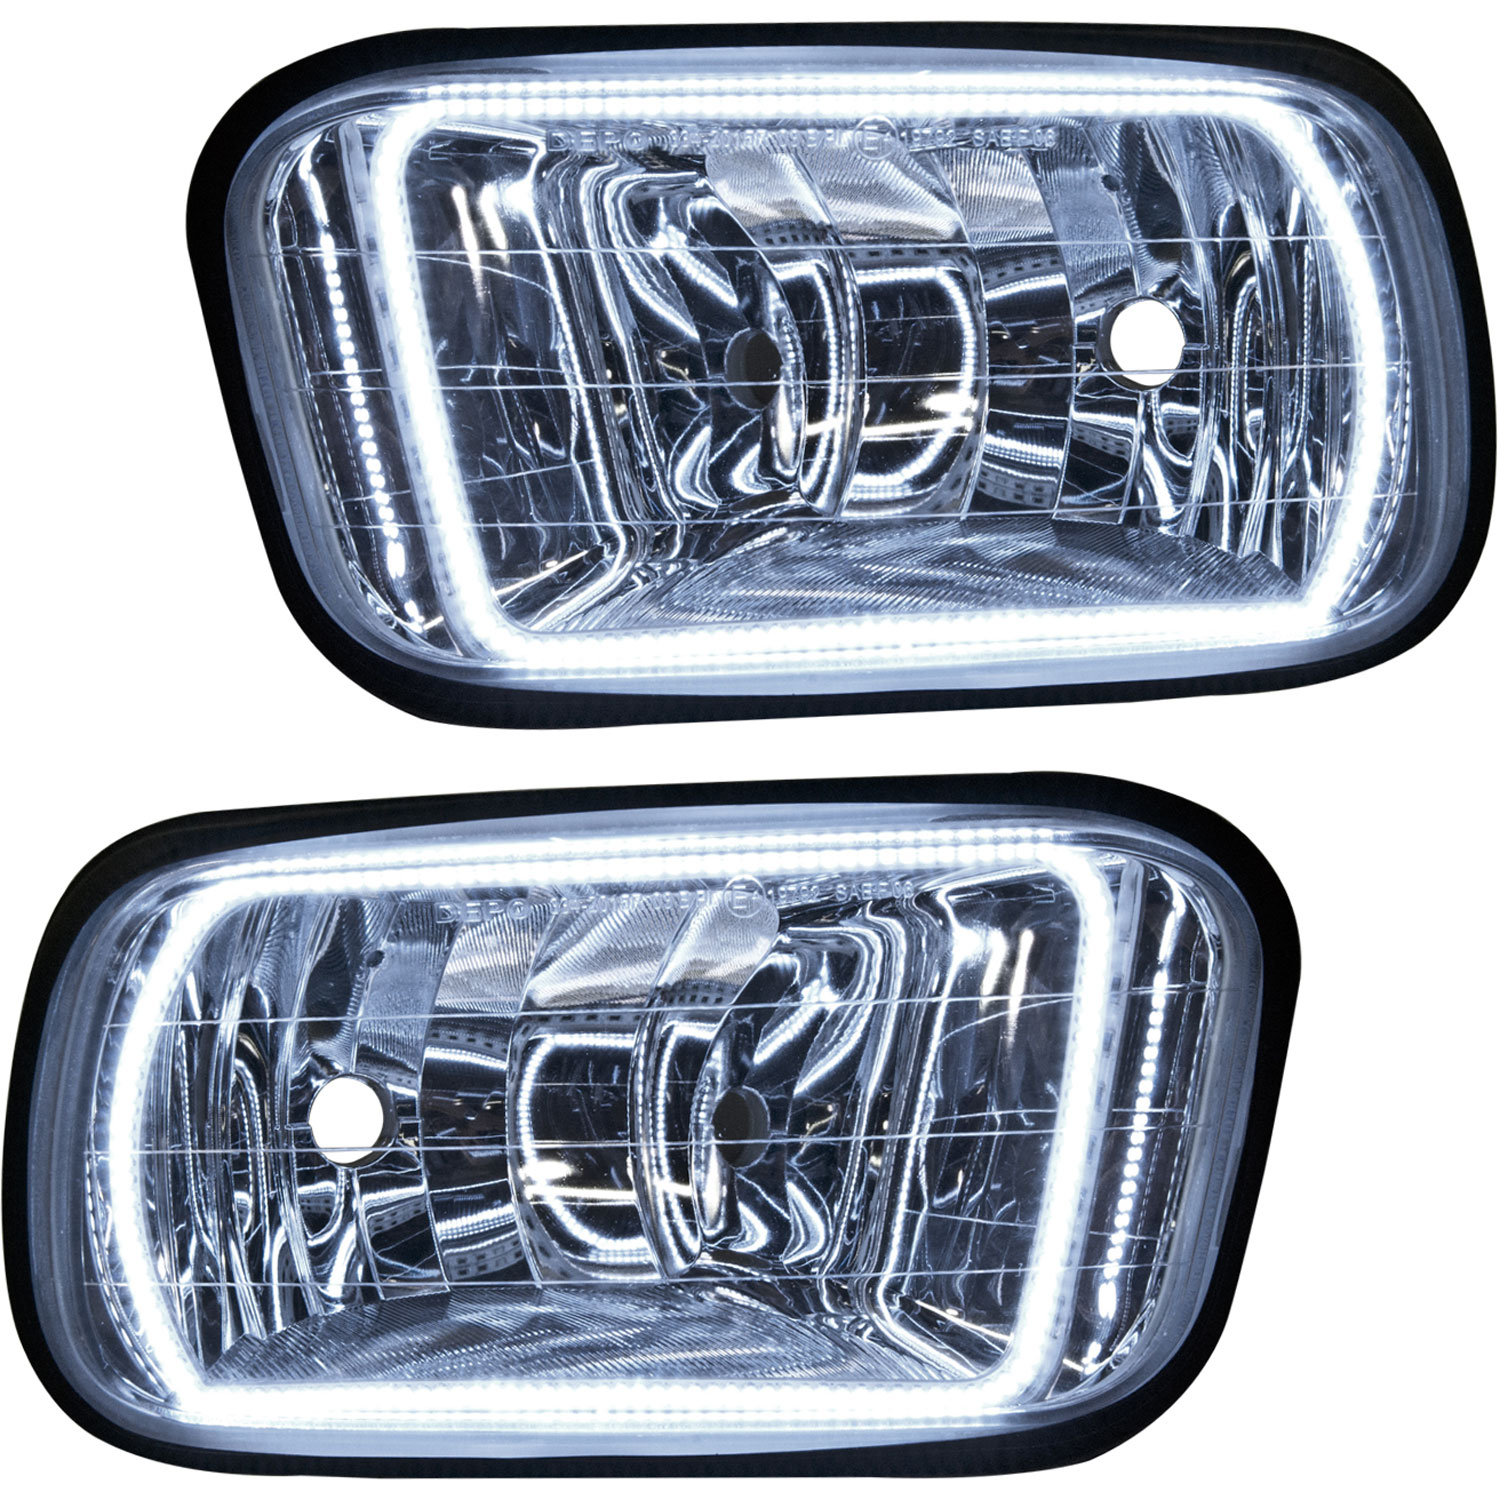 LED HALO Fog Light Assembly Comes with preinstalled white LED Halos